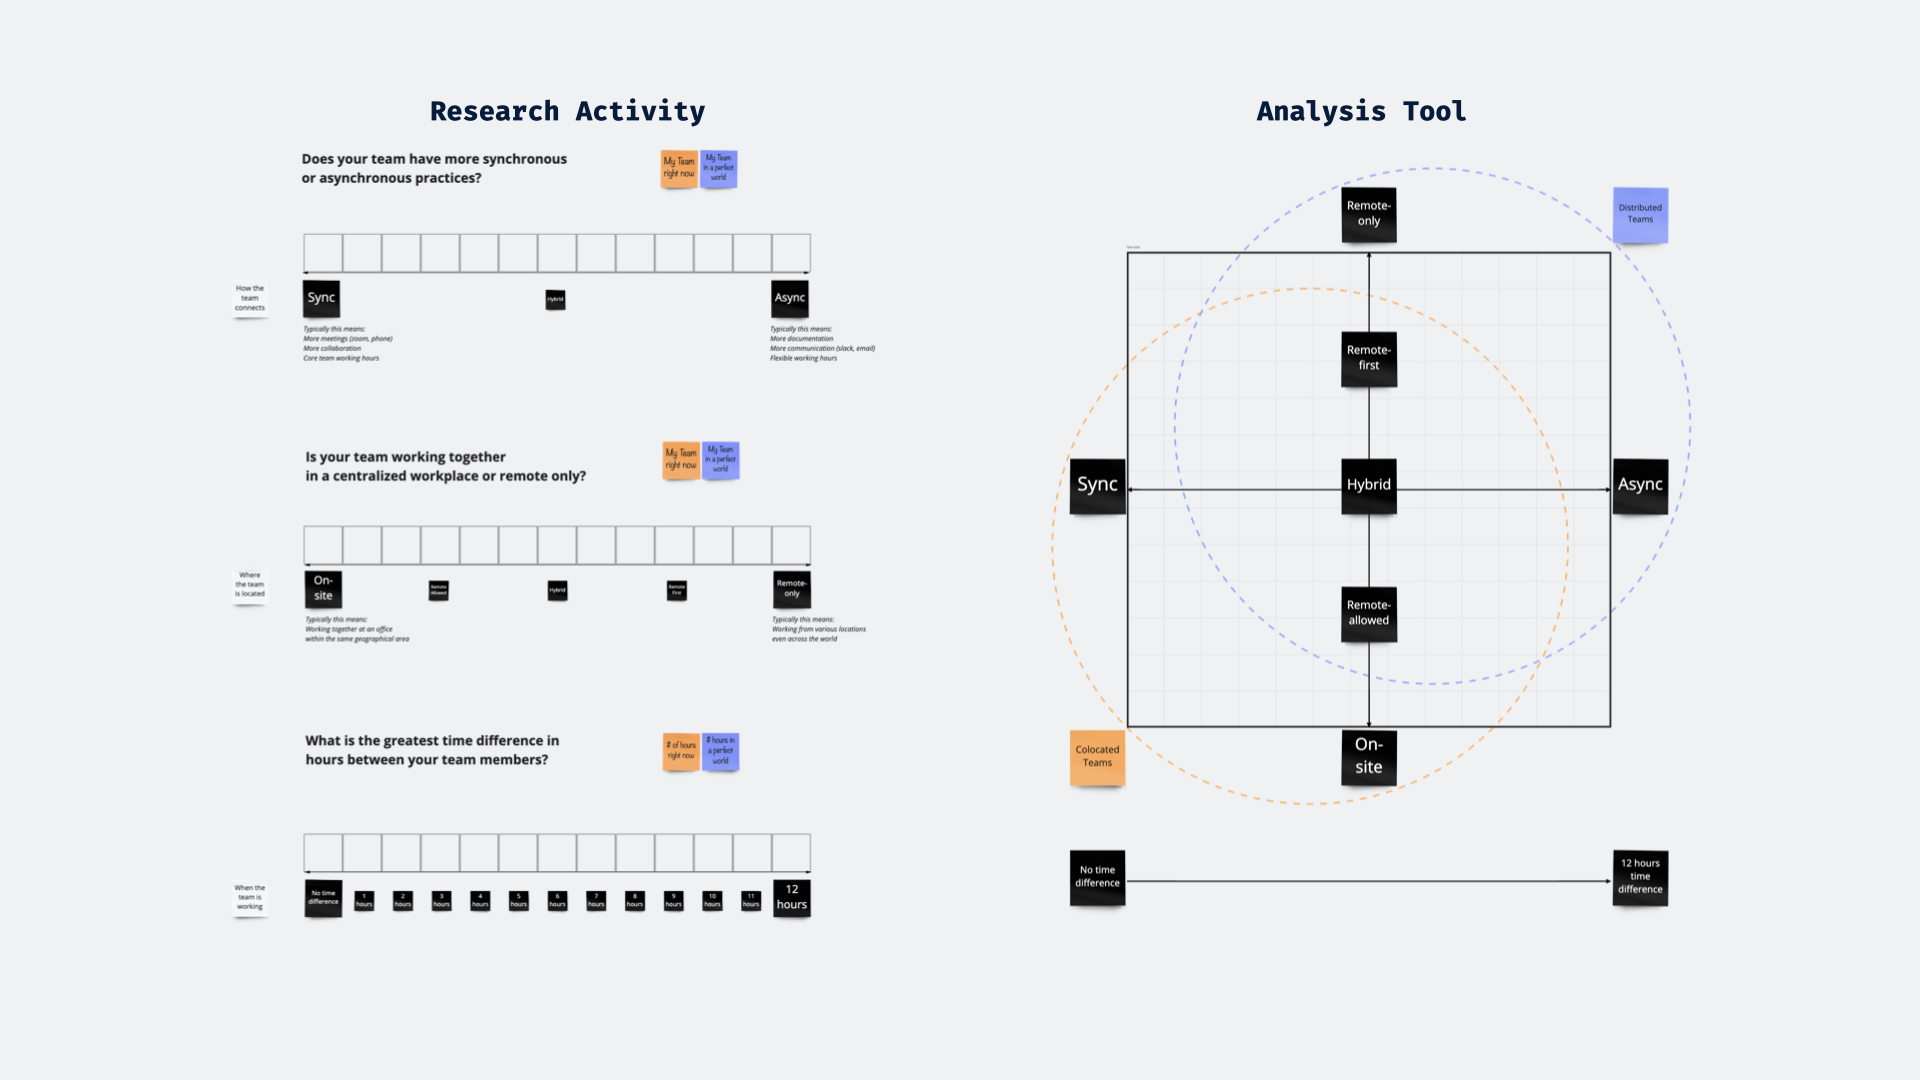 The card sorting research activity and 2 by 2 analysis tool side by side.